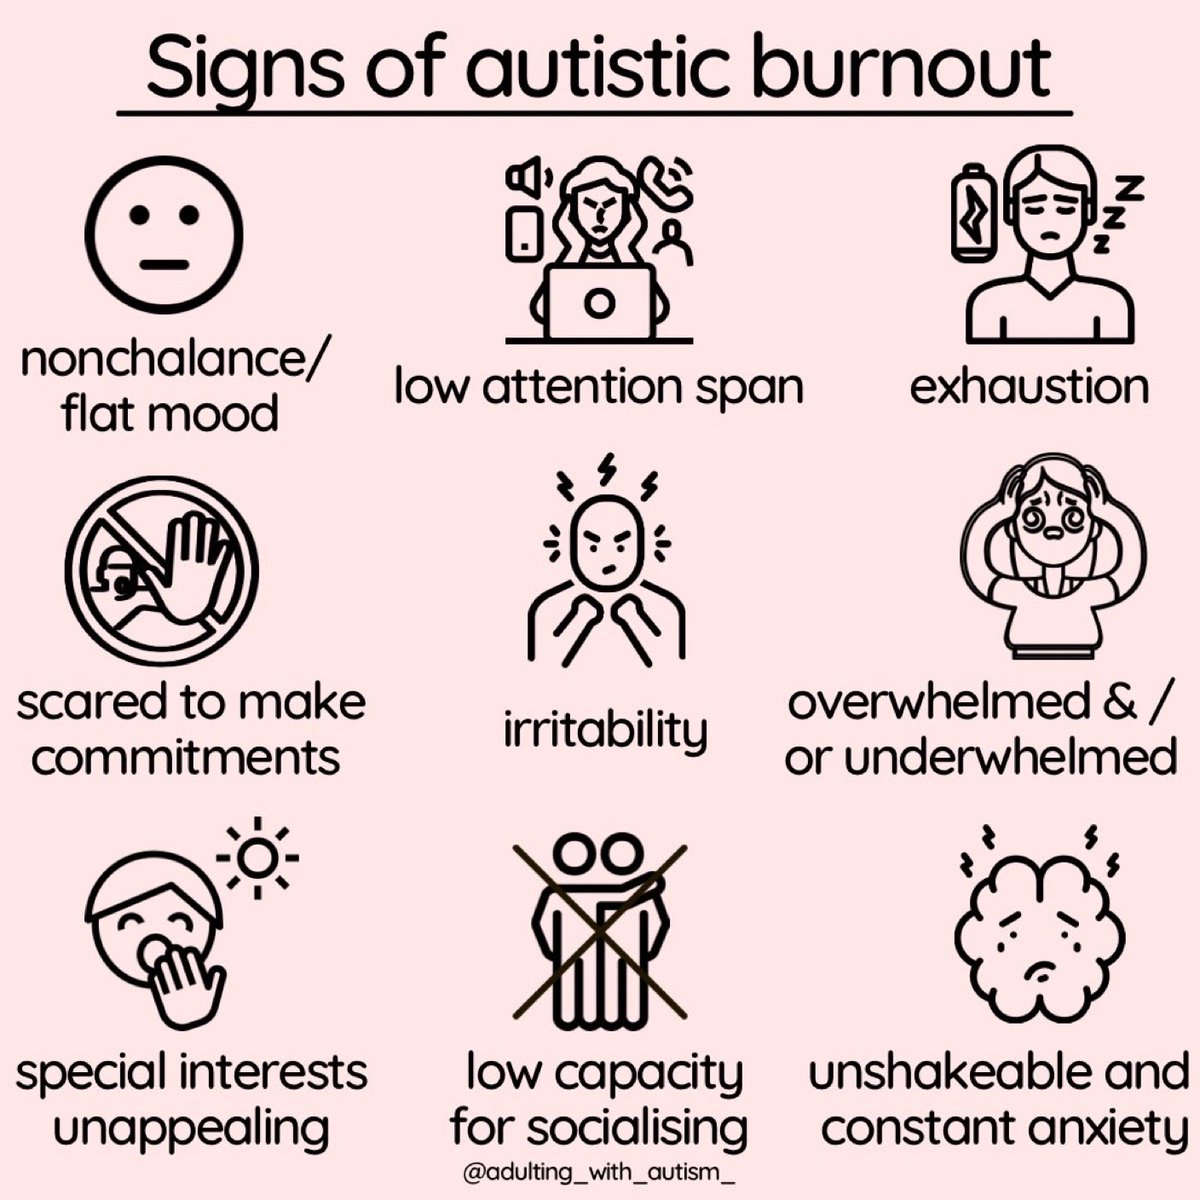 It is easy to get overcommitted, which can lead to autistic burnout. Learn to say no to some things. That is exercising good self-care.

image by: @adulting_with_autism_

#ActuallyAutistic #AuDHD